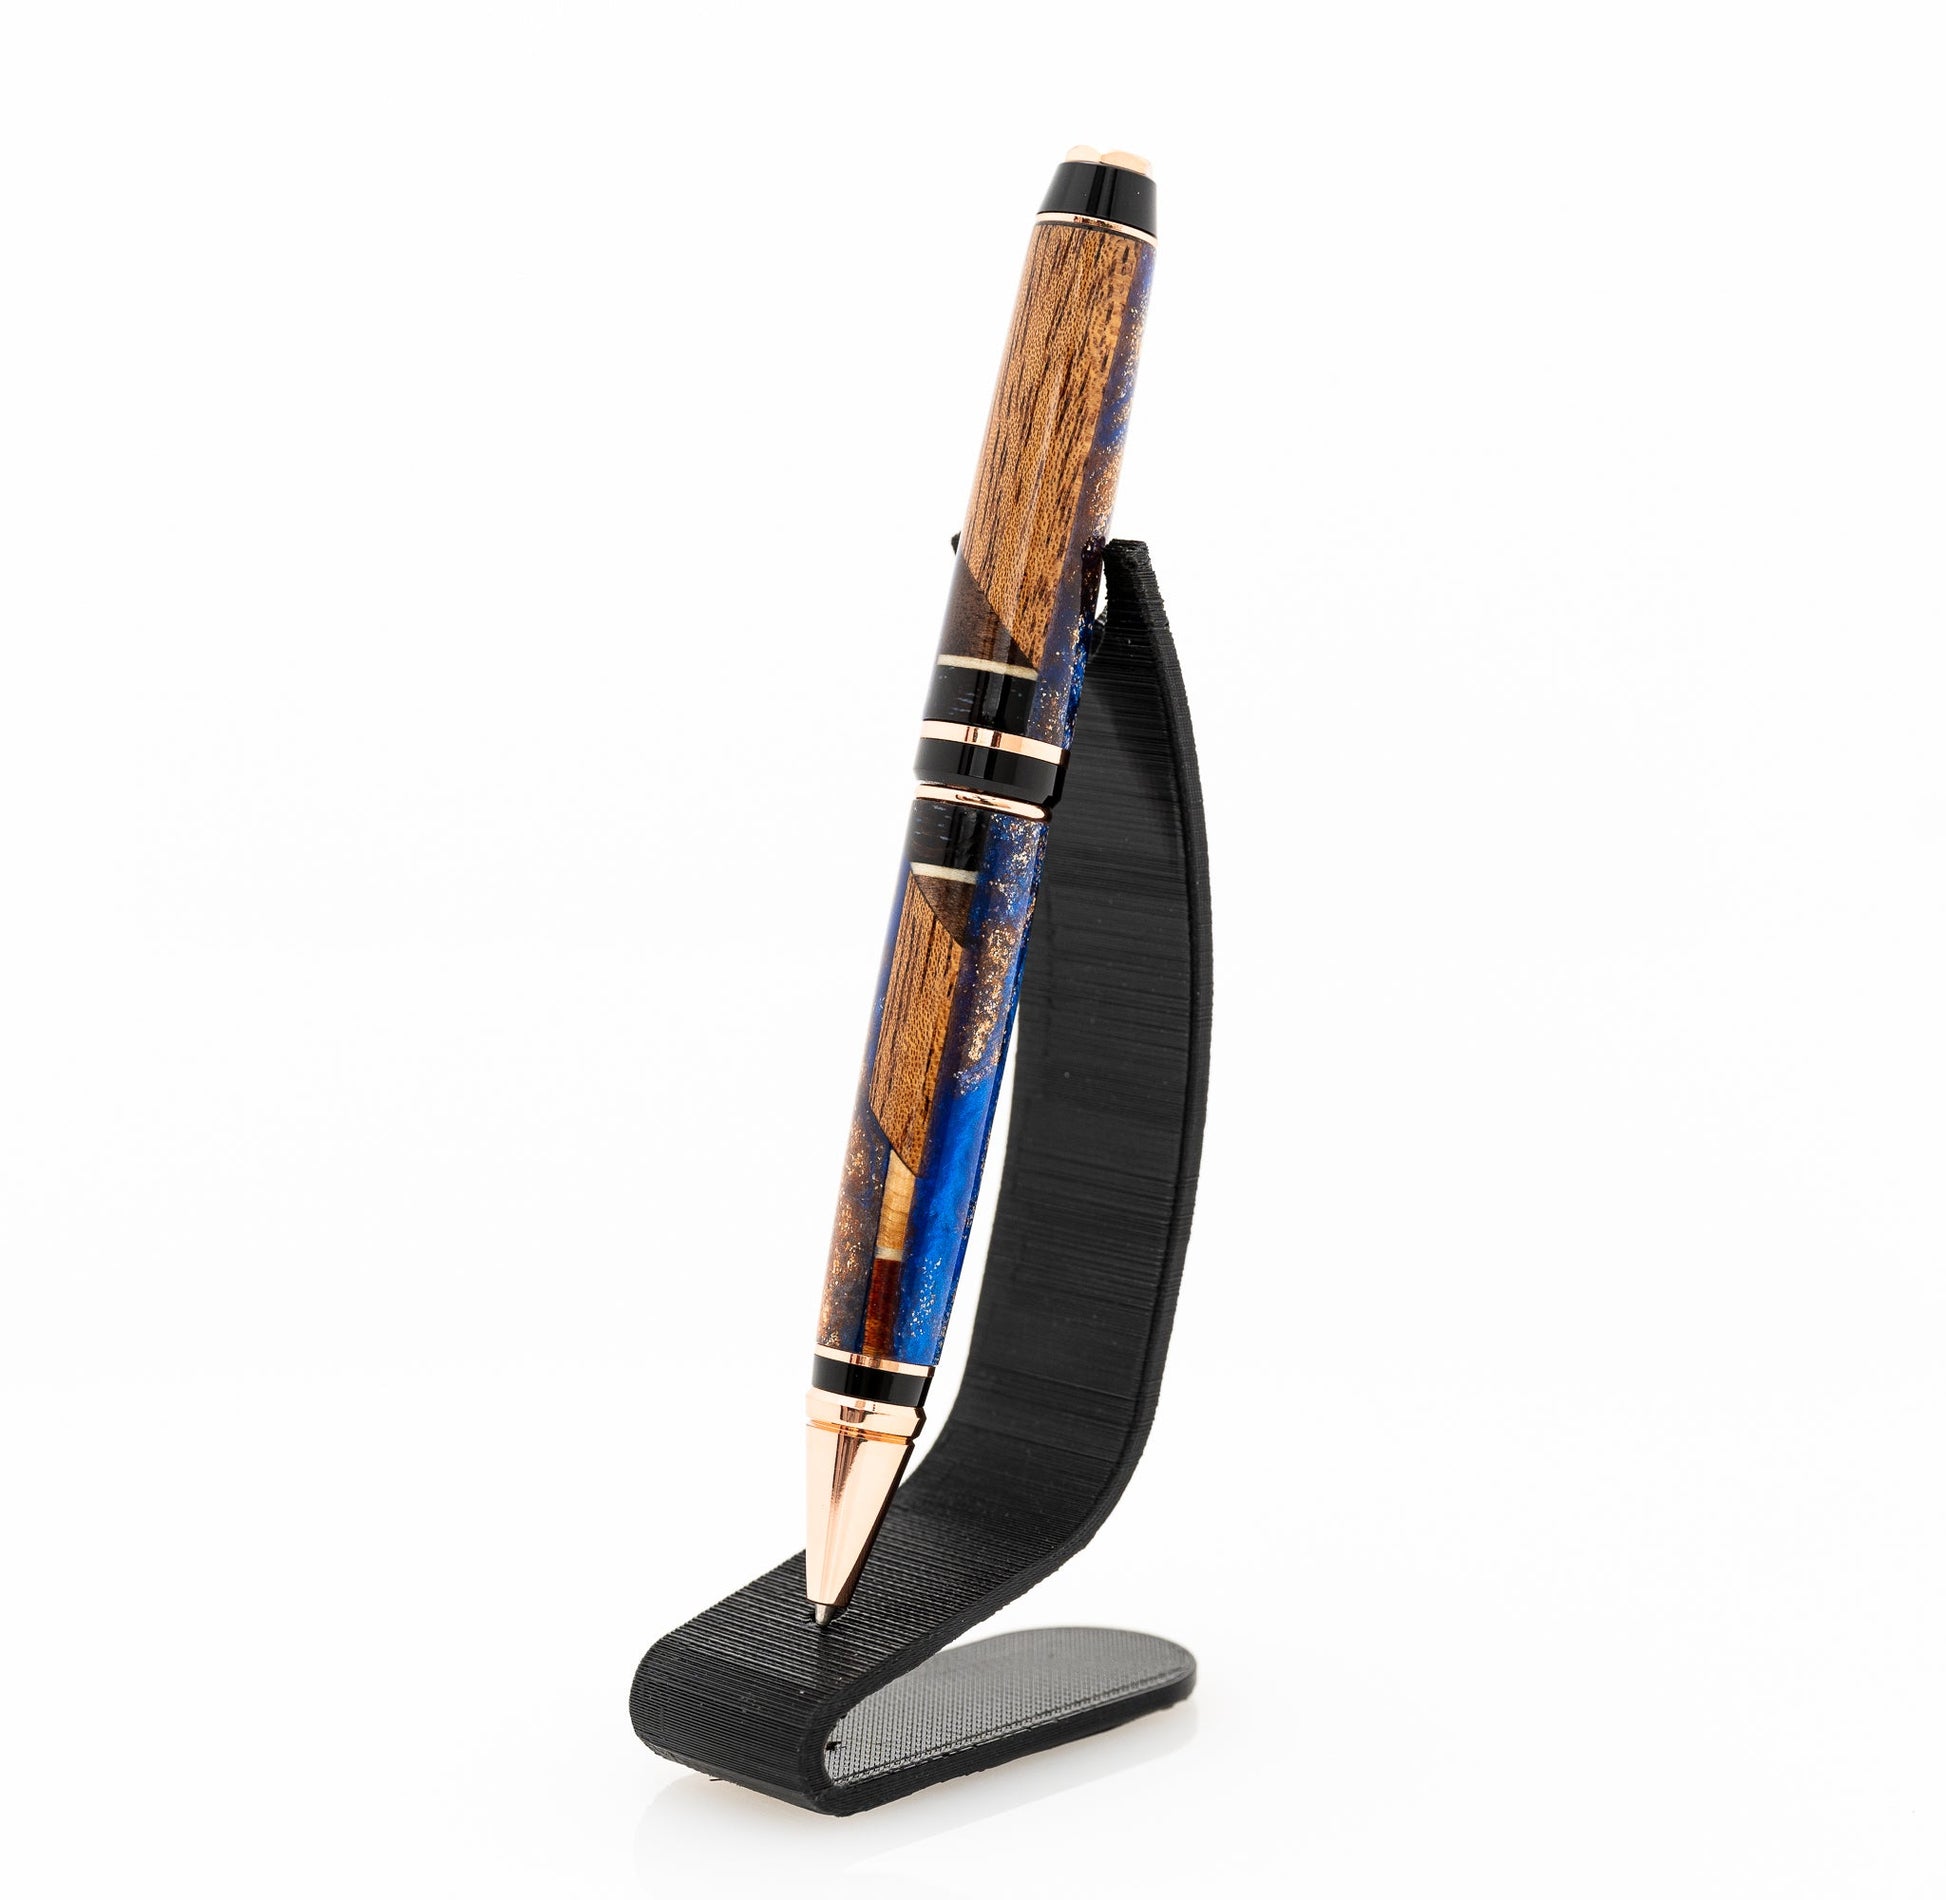 Handmade African Mahogany, Olivewood and Wenge wood twist pen with blue and bronze swirl resin with bright copper plating